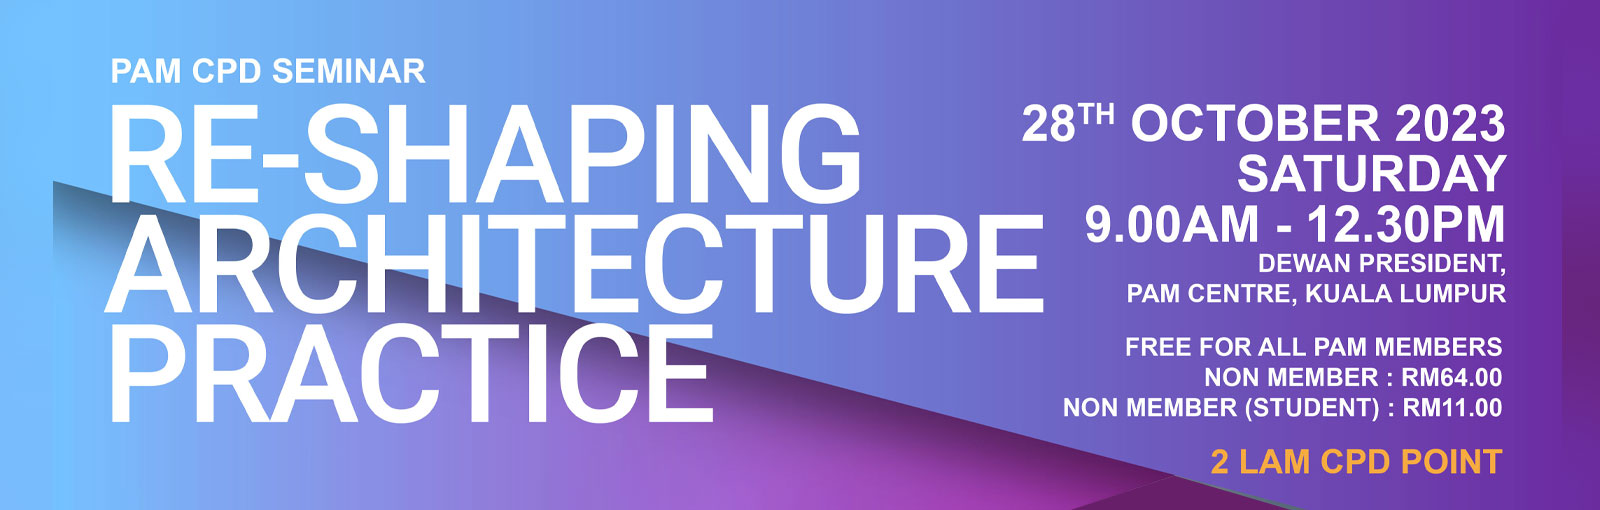 Re-shaping Architecture Practice 